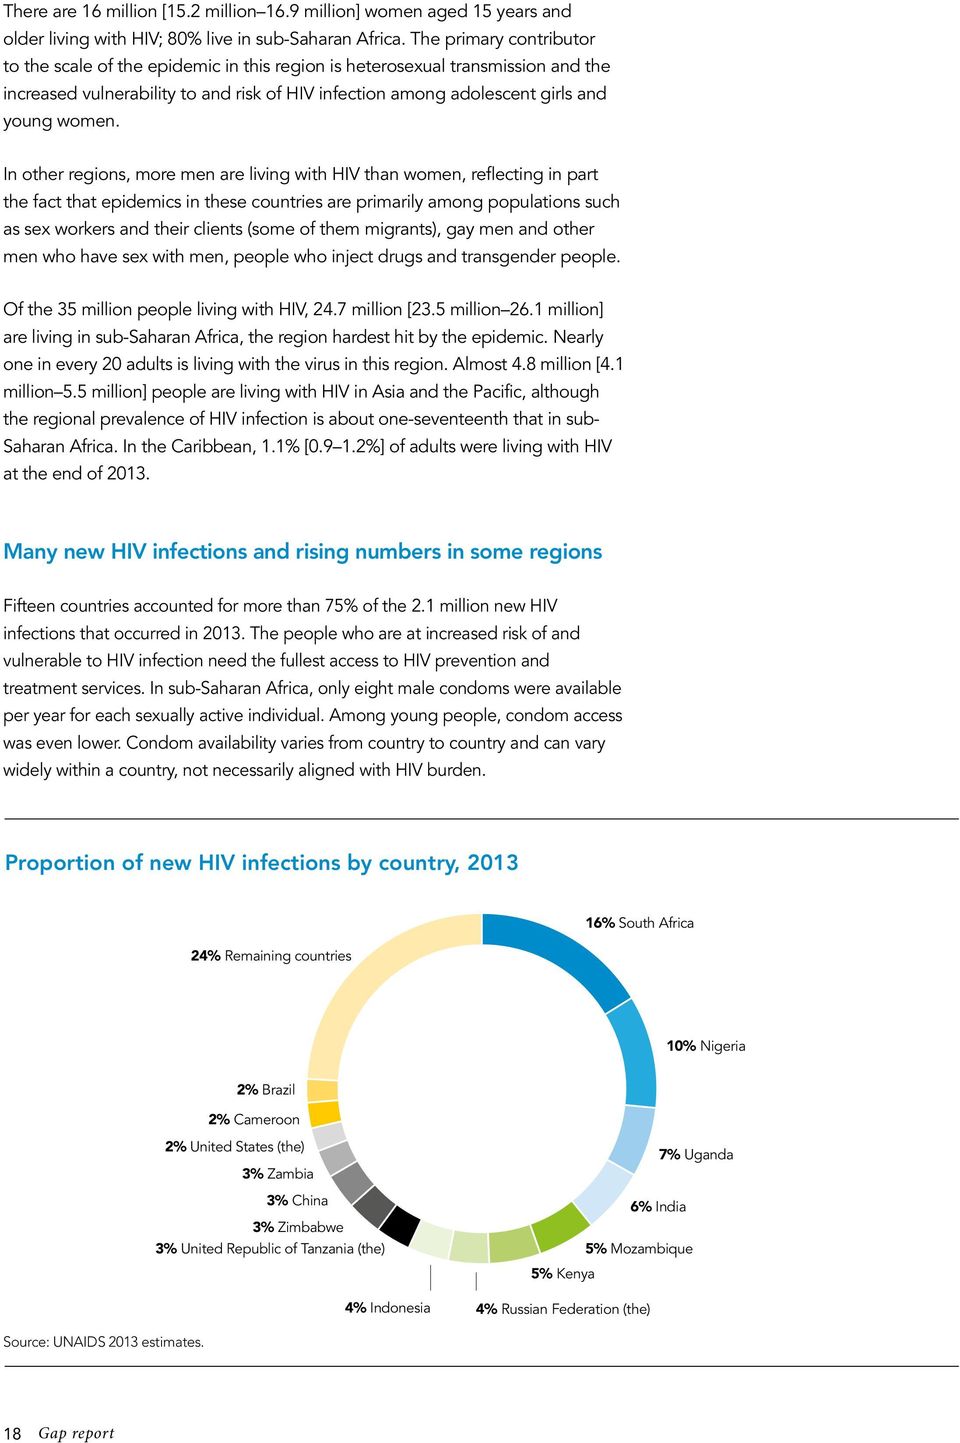 In other regions, more men are living with HIV than women, reflecting in part the fact that epidemics in these countries are primarily among populations such as sex workers and their clients (some of